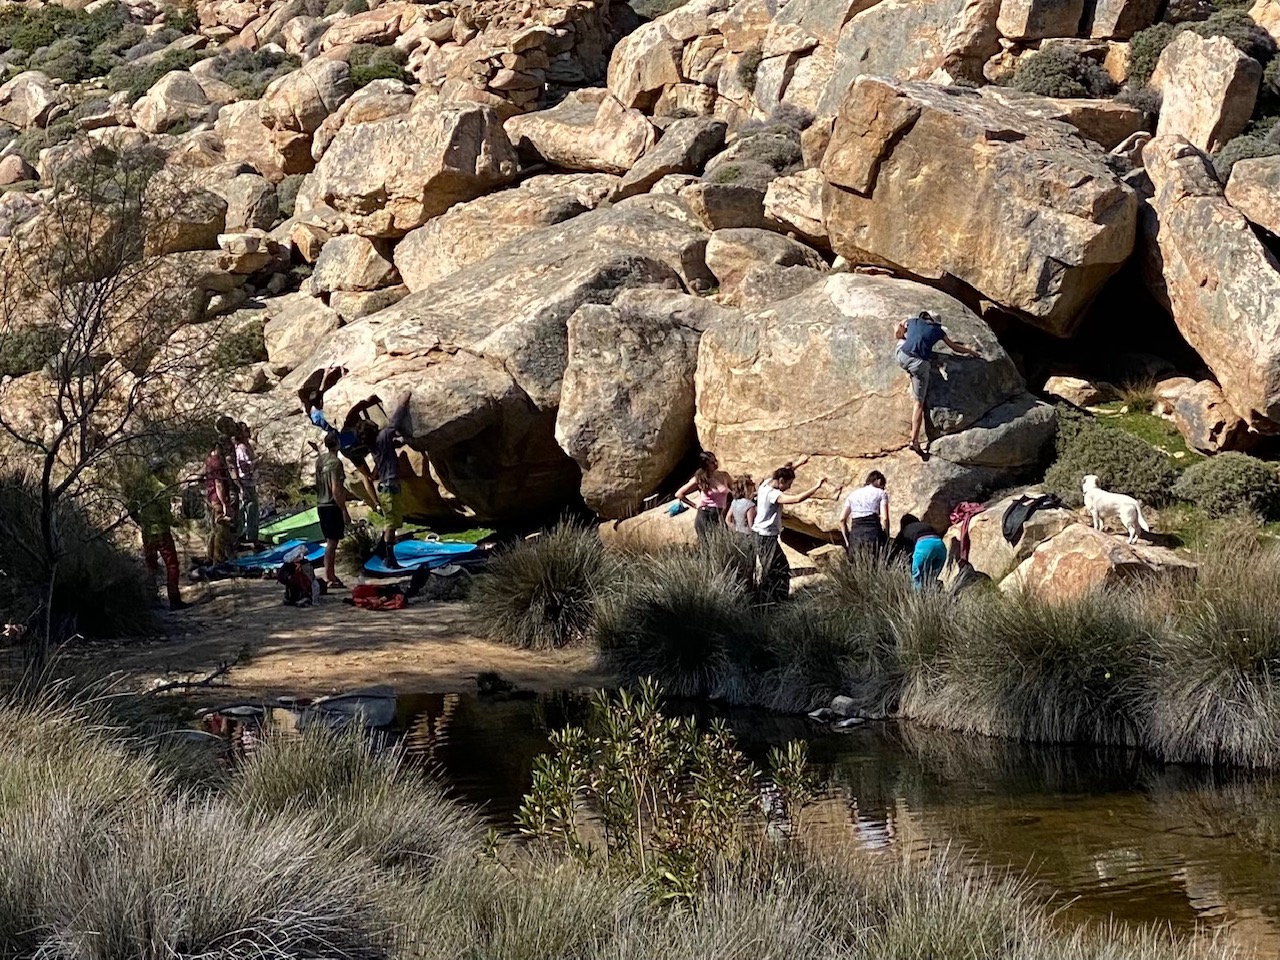 Group at the bottom of boulders in front of a river